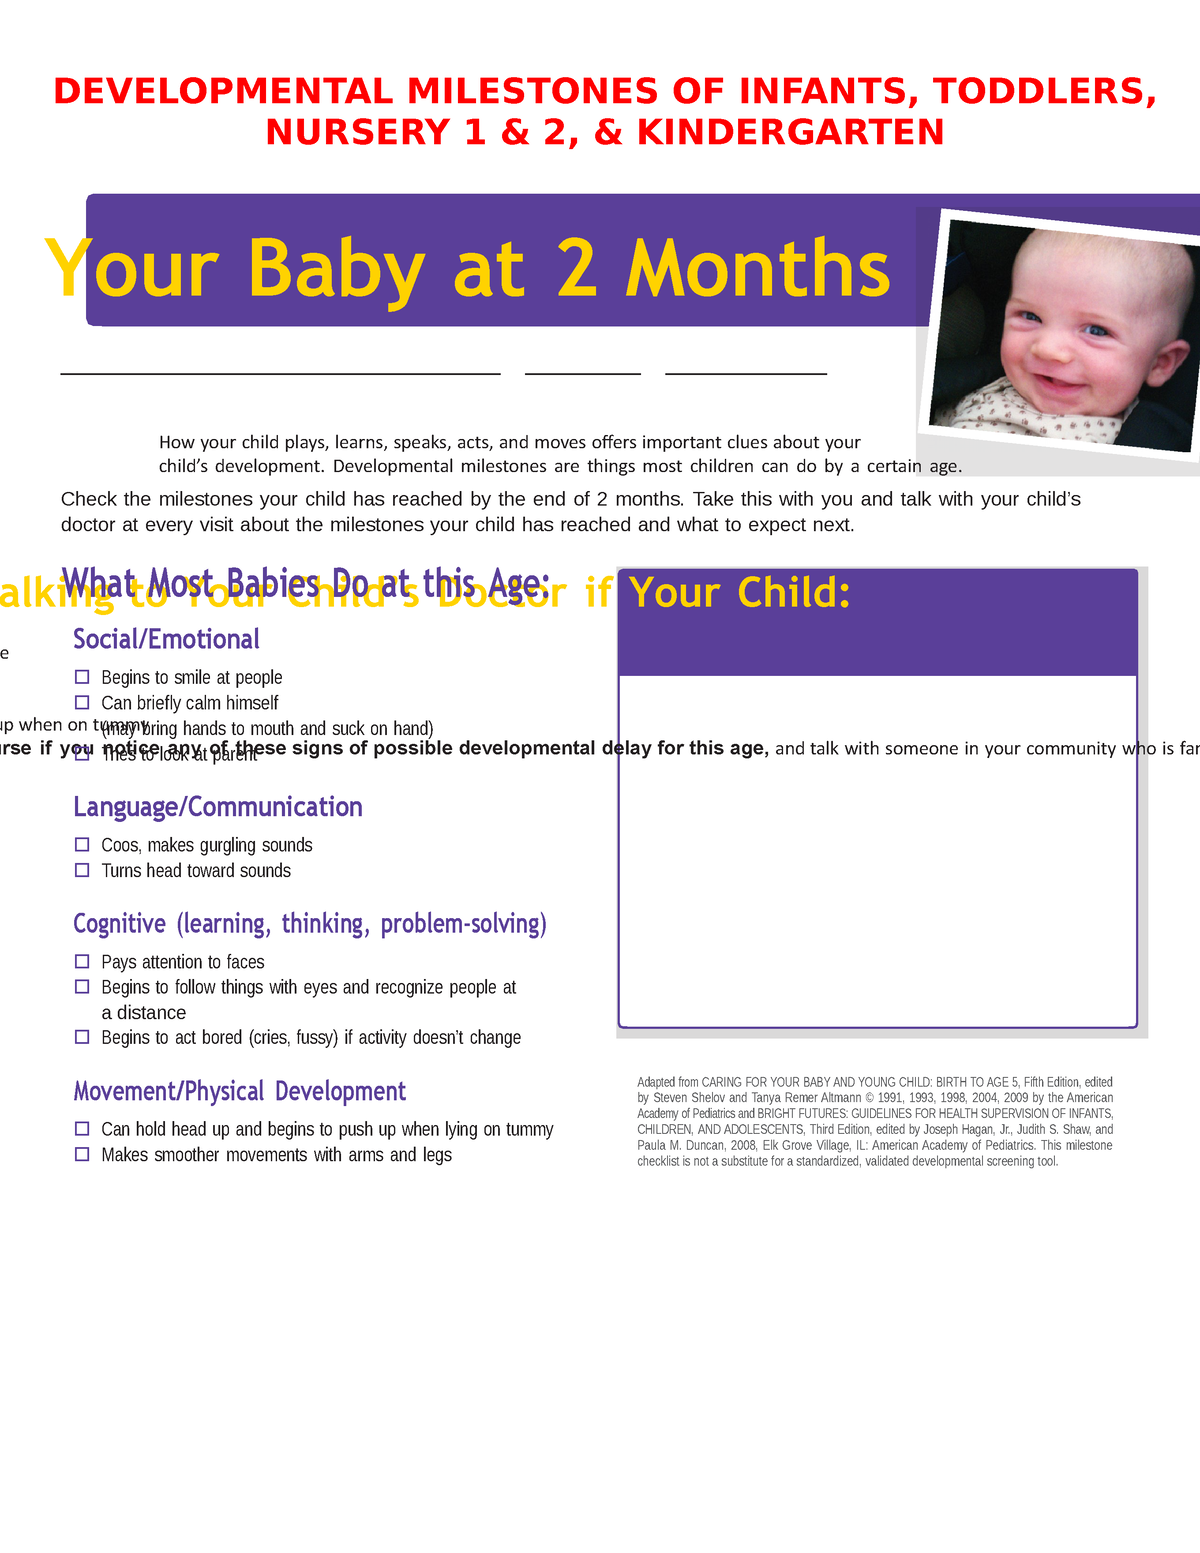 Foundation of Early Childhoof - Developmental Milestones - Your Baby at ...